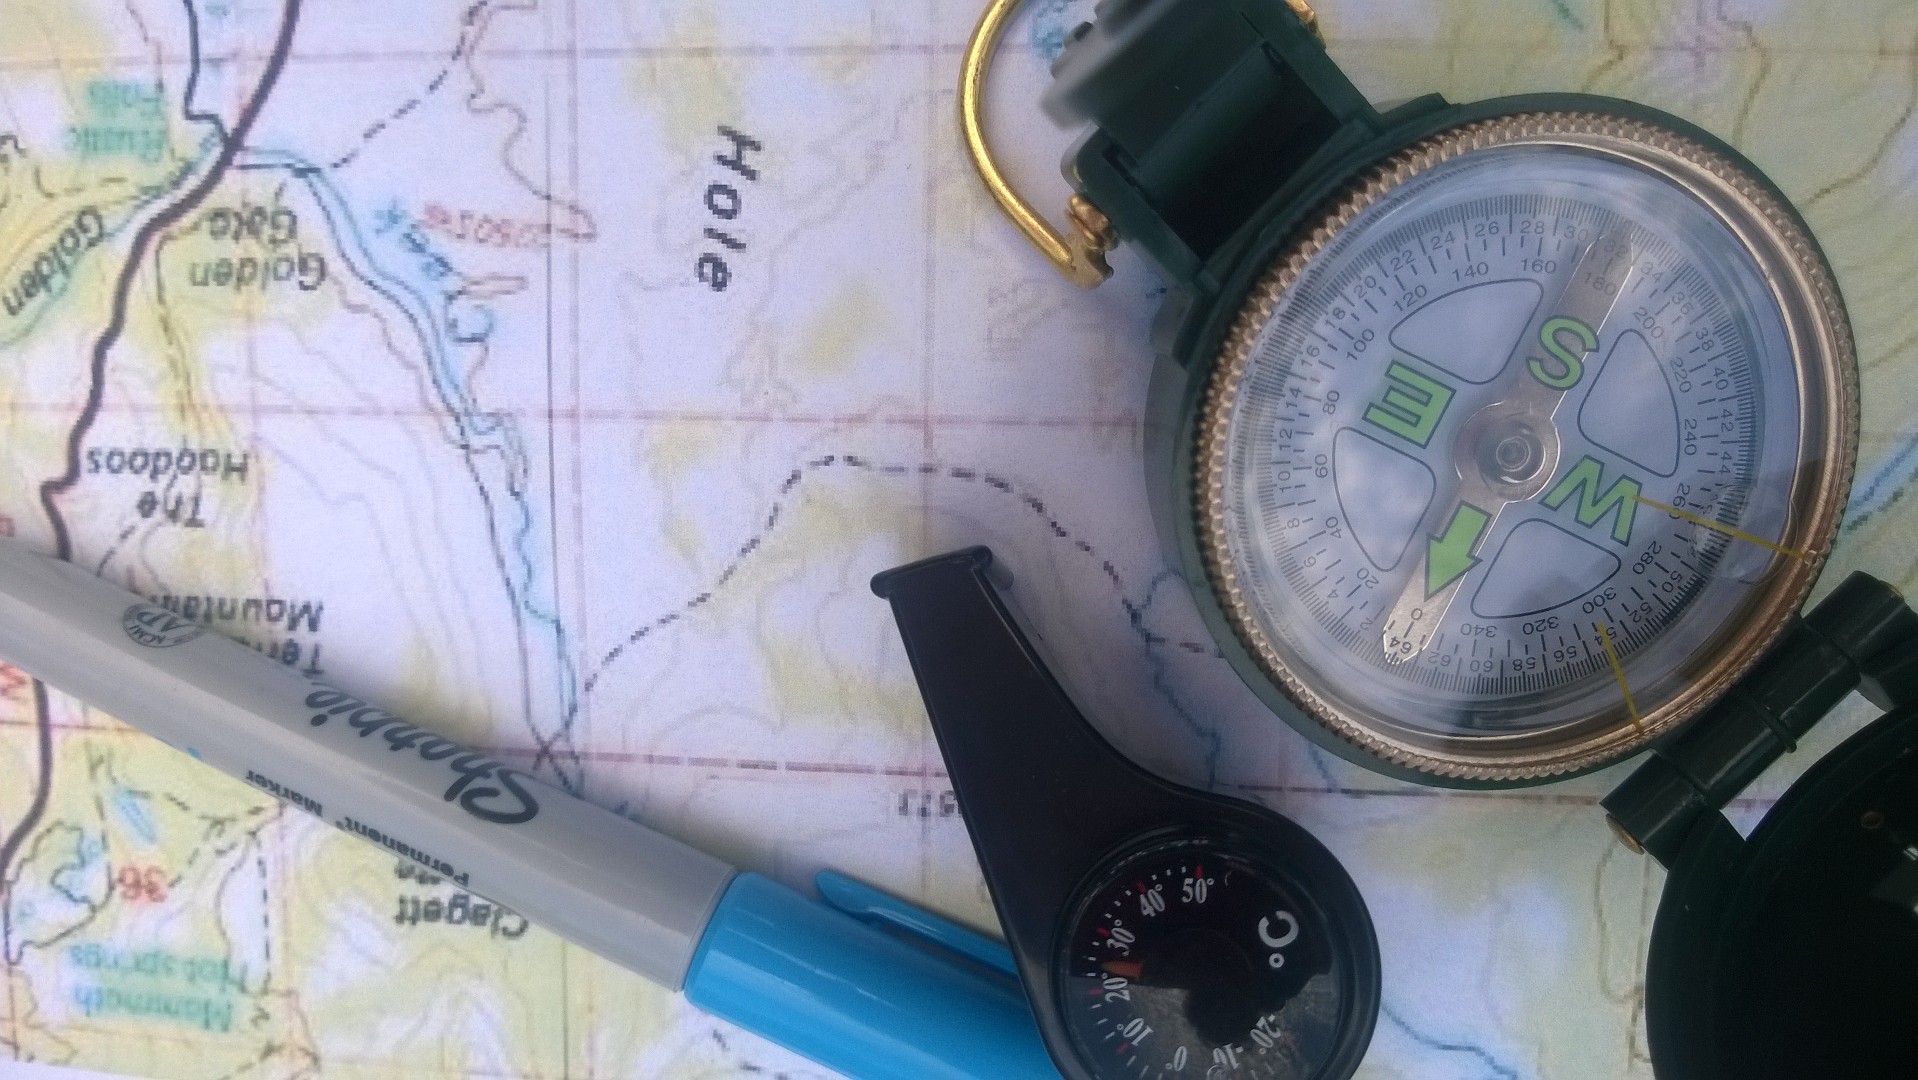 map, compass, emergency whistle